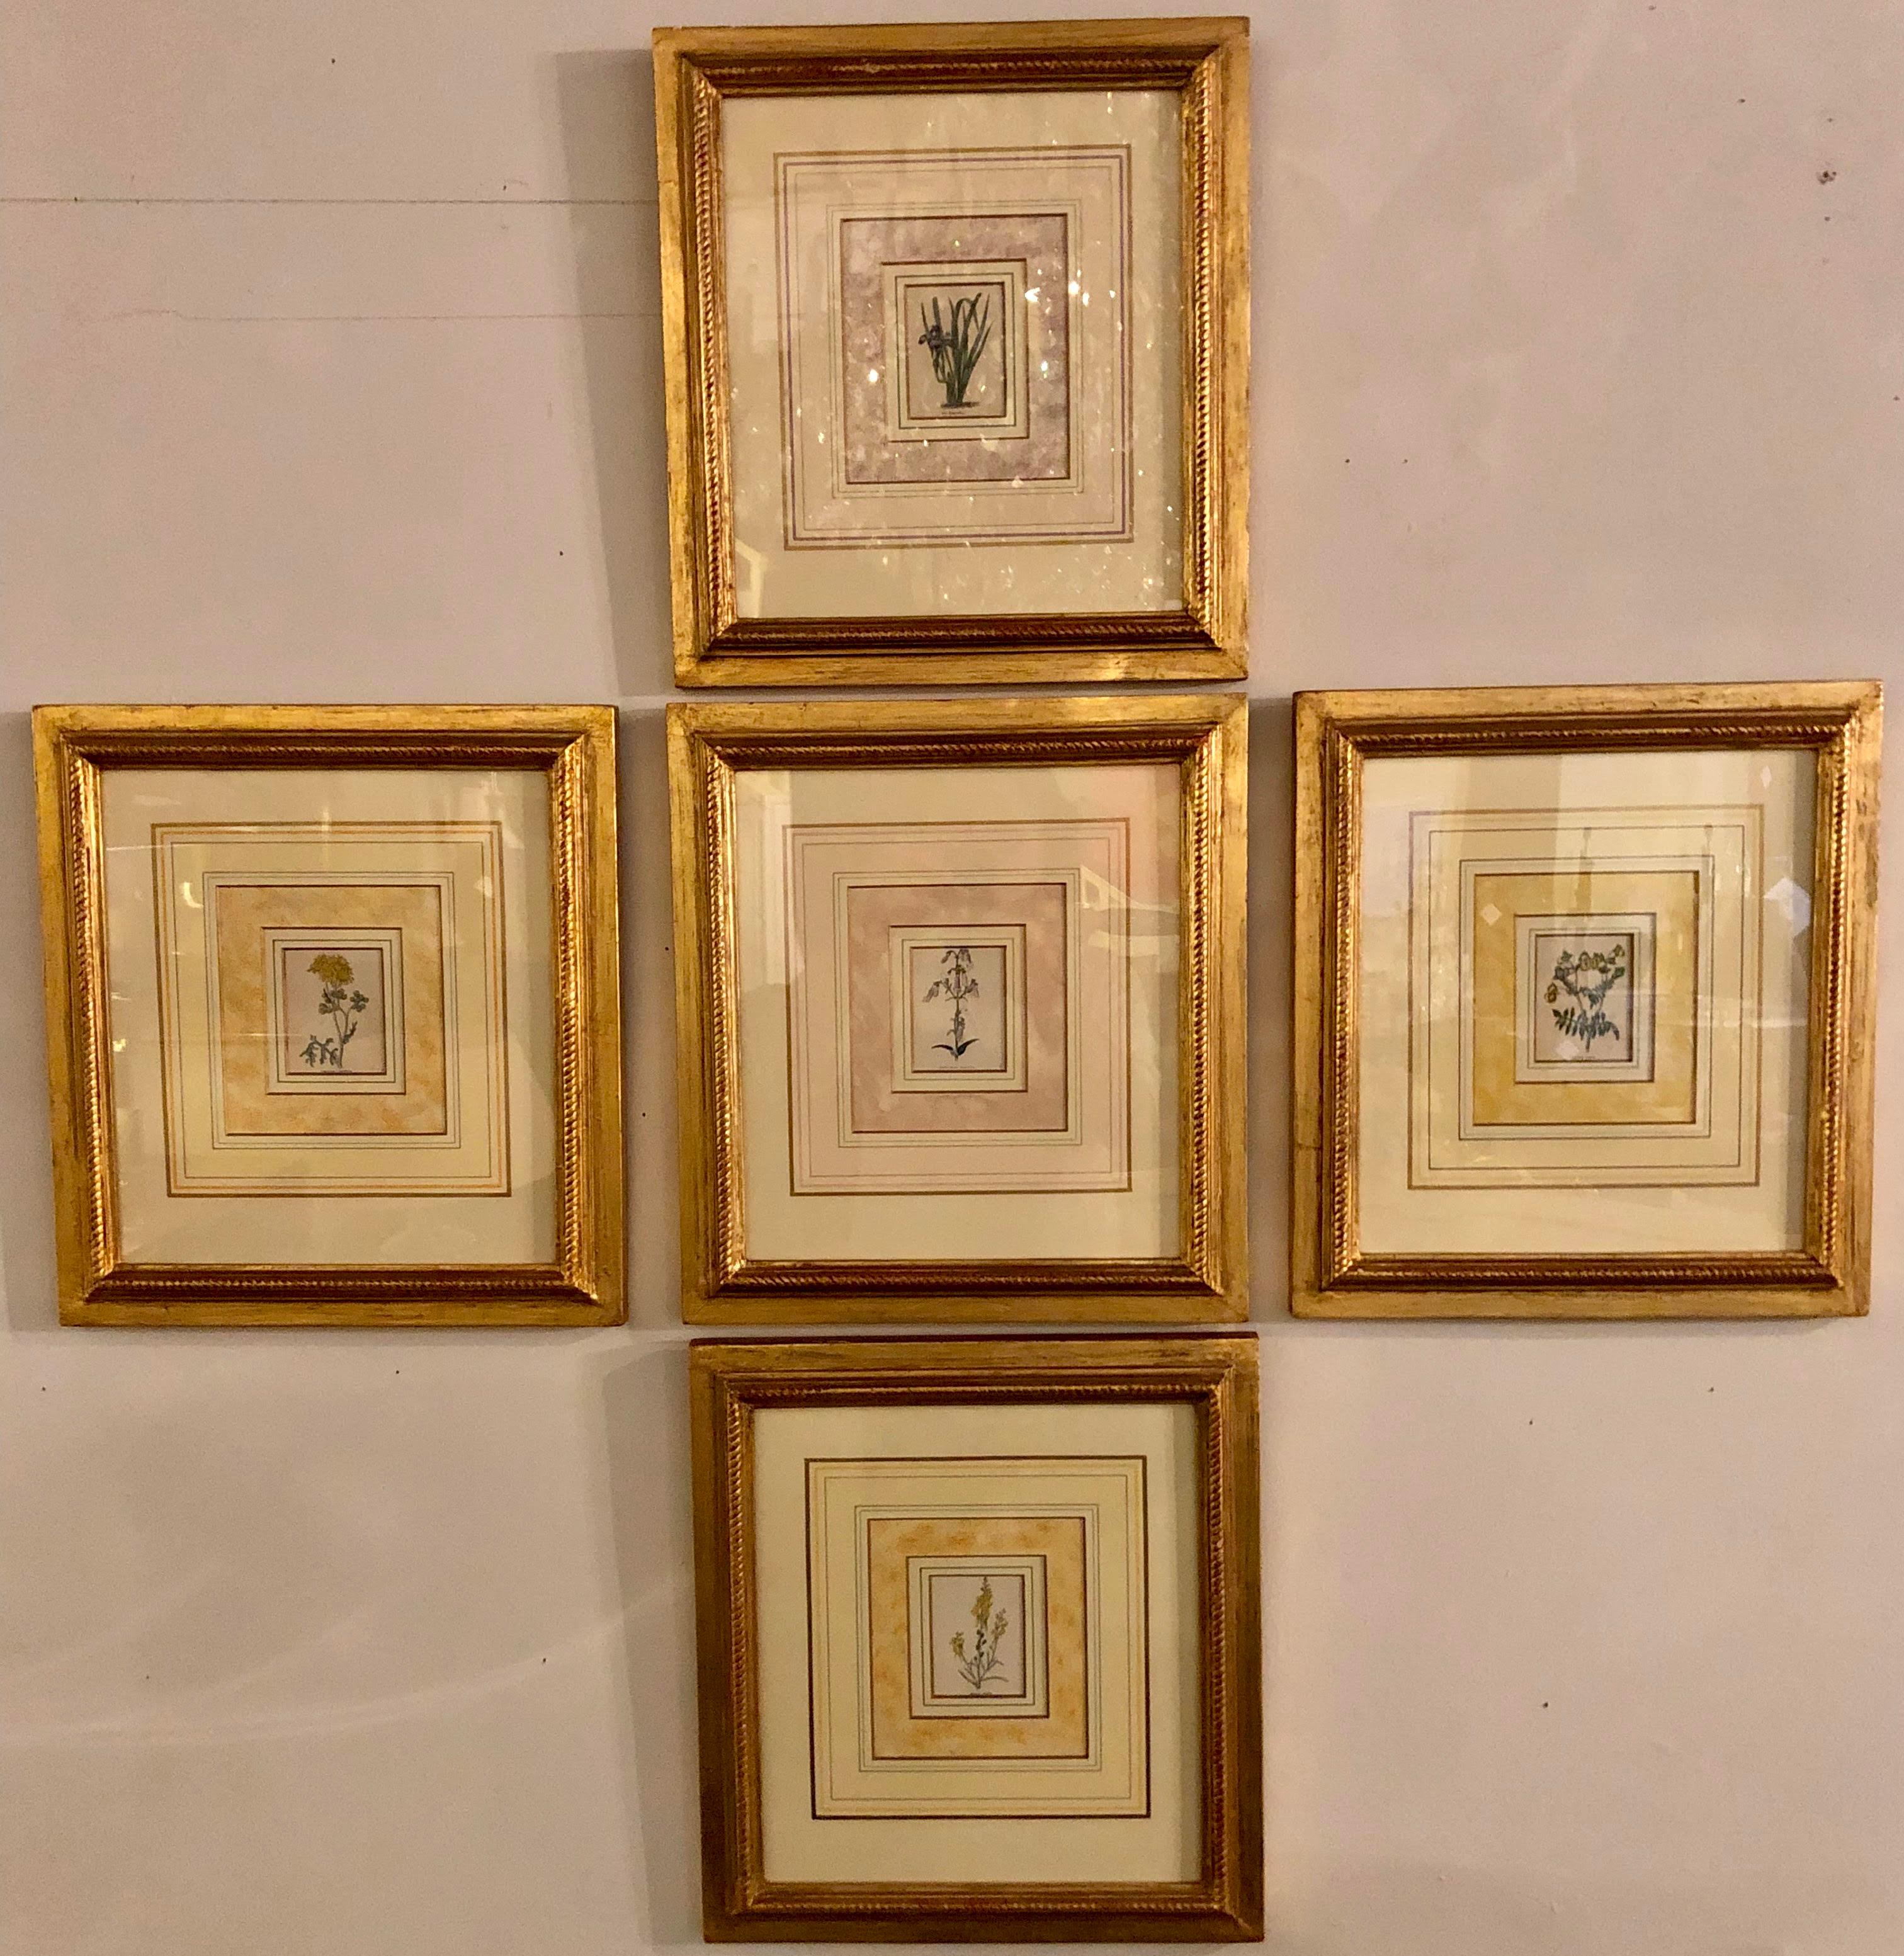 One of several spectacular groupings of engravings fresh from a Bronxville Mansion. Ten Copperplate engravings by Benjamin Maund (British) in the finest gilt frames wonderfully matted by Judy Cormier. This set showing ten pieces depicting the